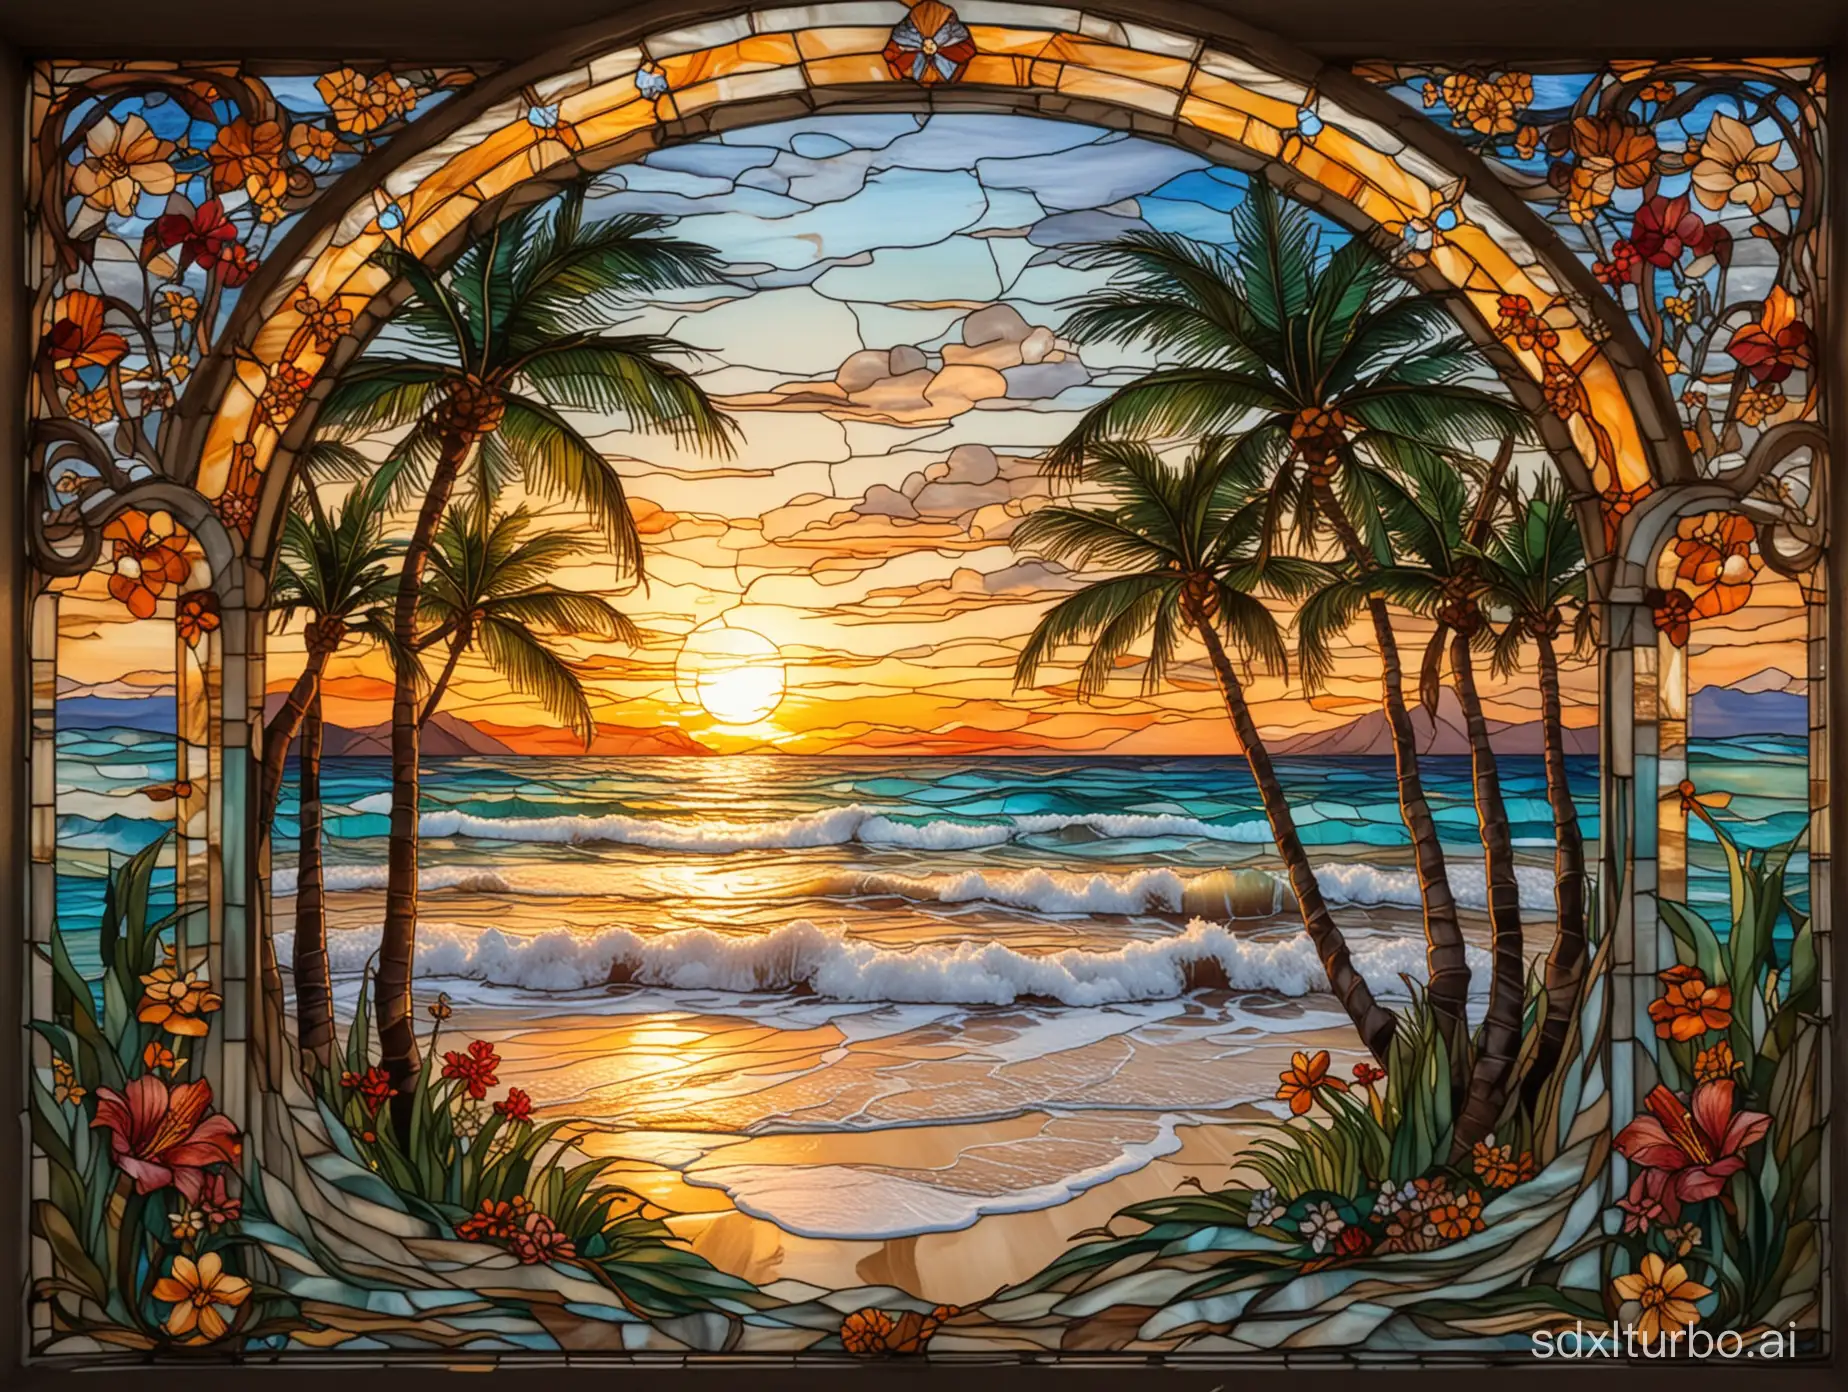 Art Nouveau background stained glass window, sunset’s view from the white sandy beach , waves softly rolling in, coconut trees and tropical flowers